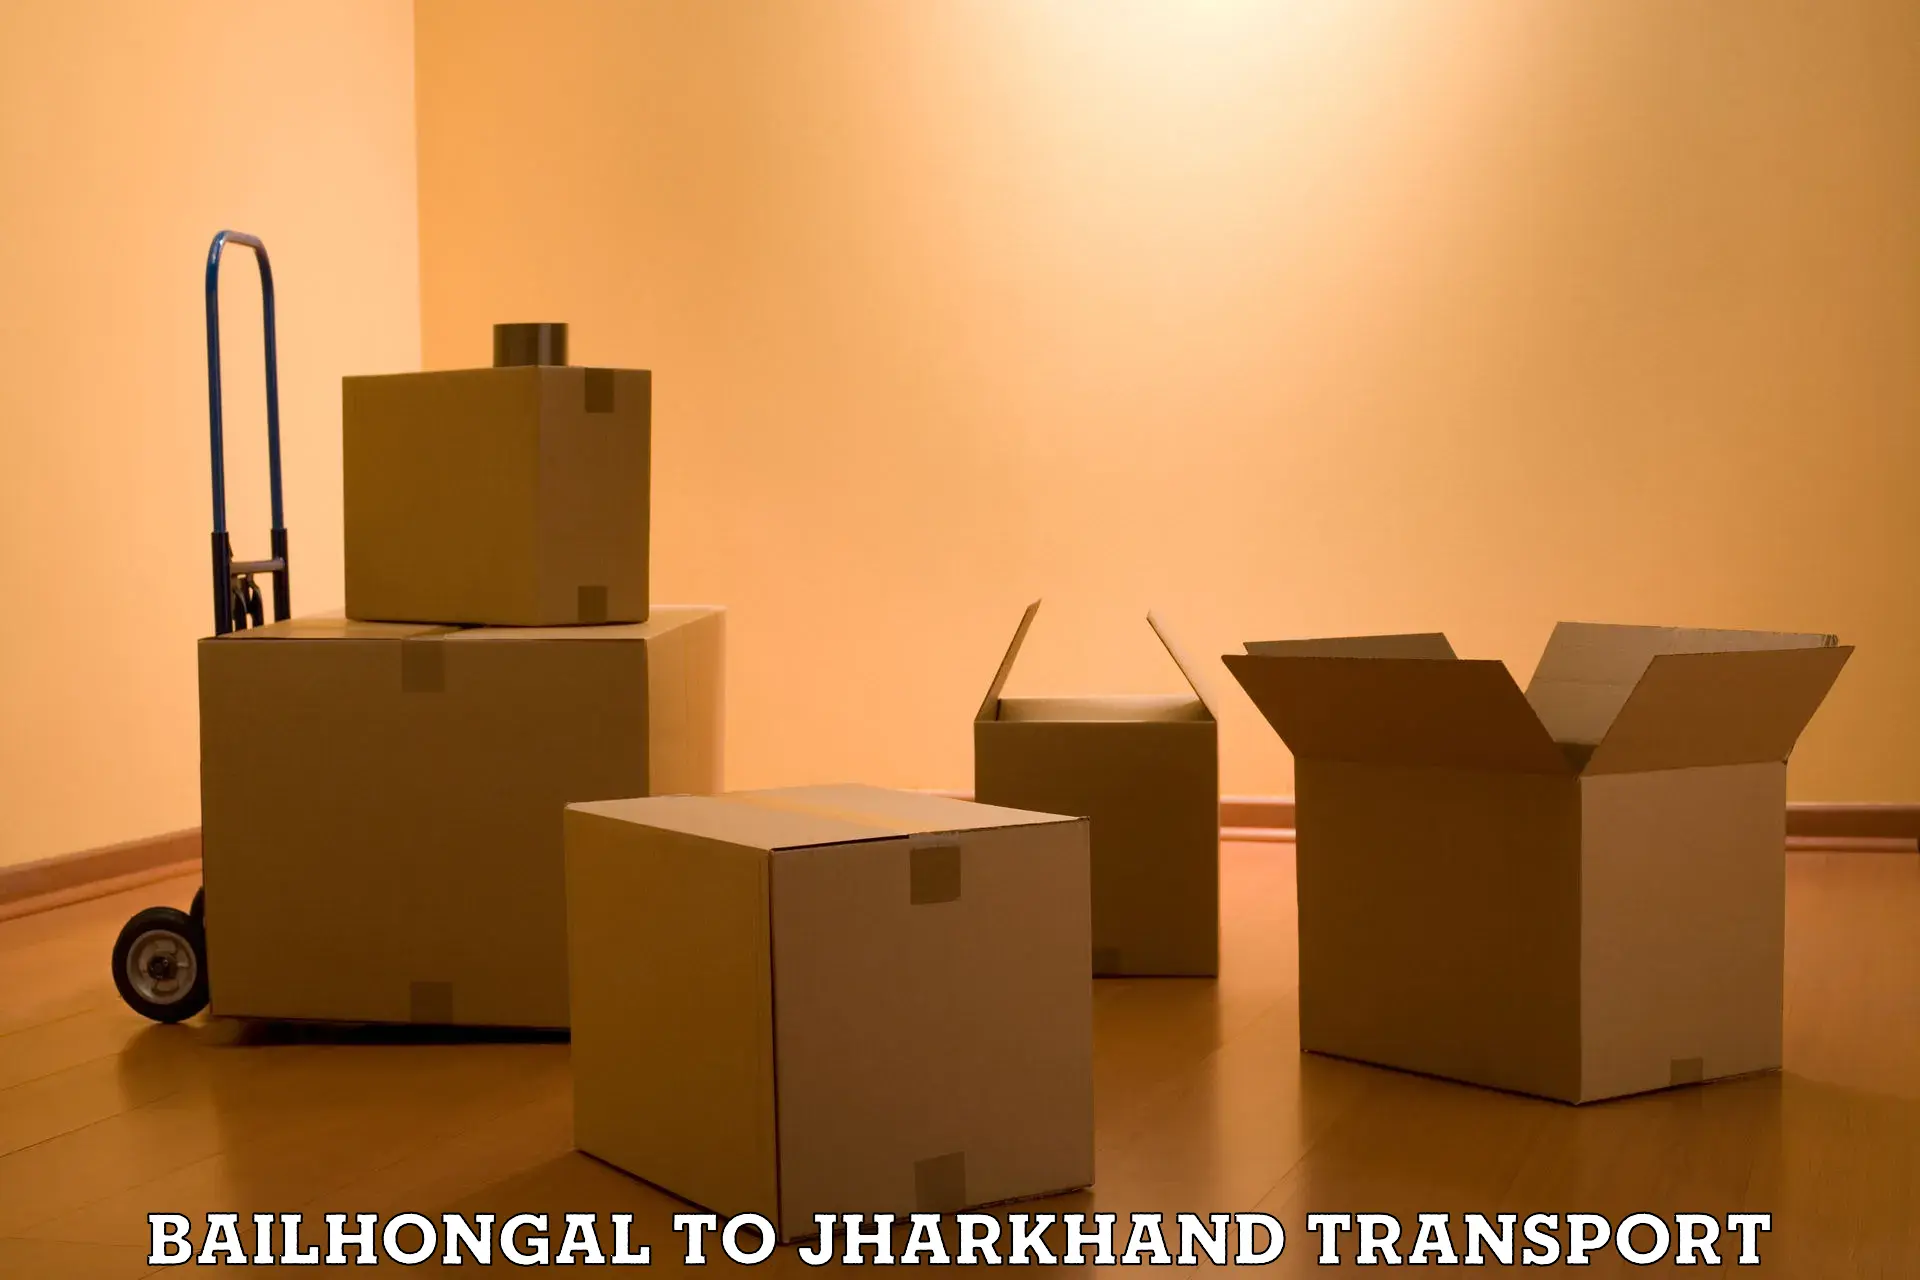 Daily parcel service transport Bailhongal to Dhanbad